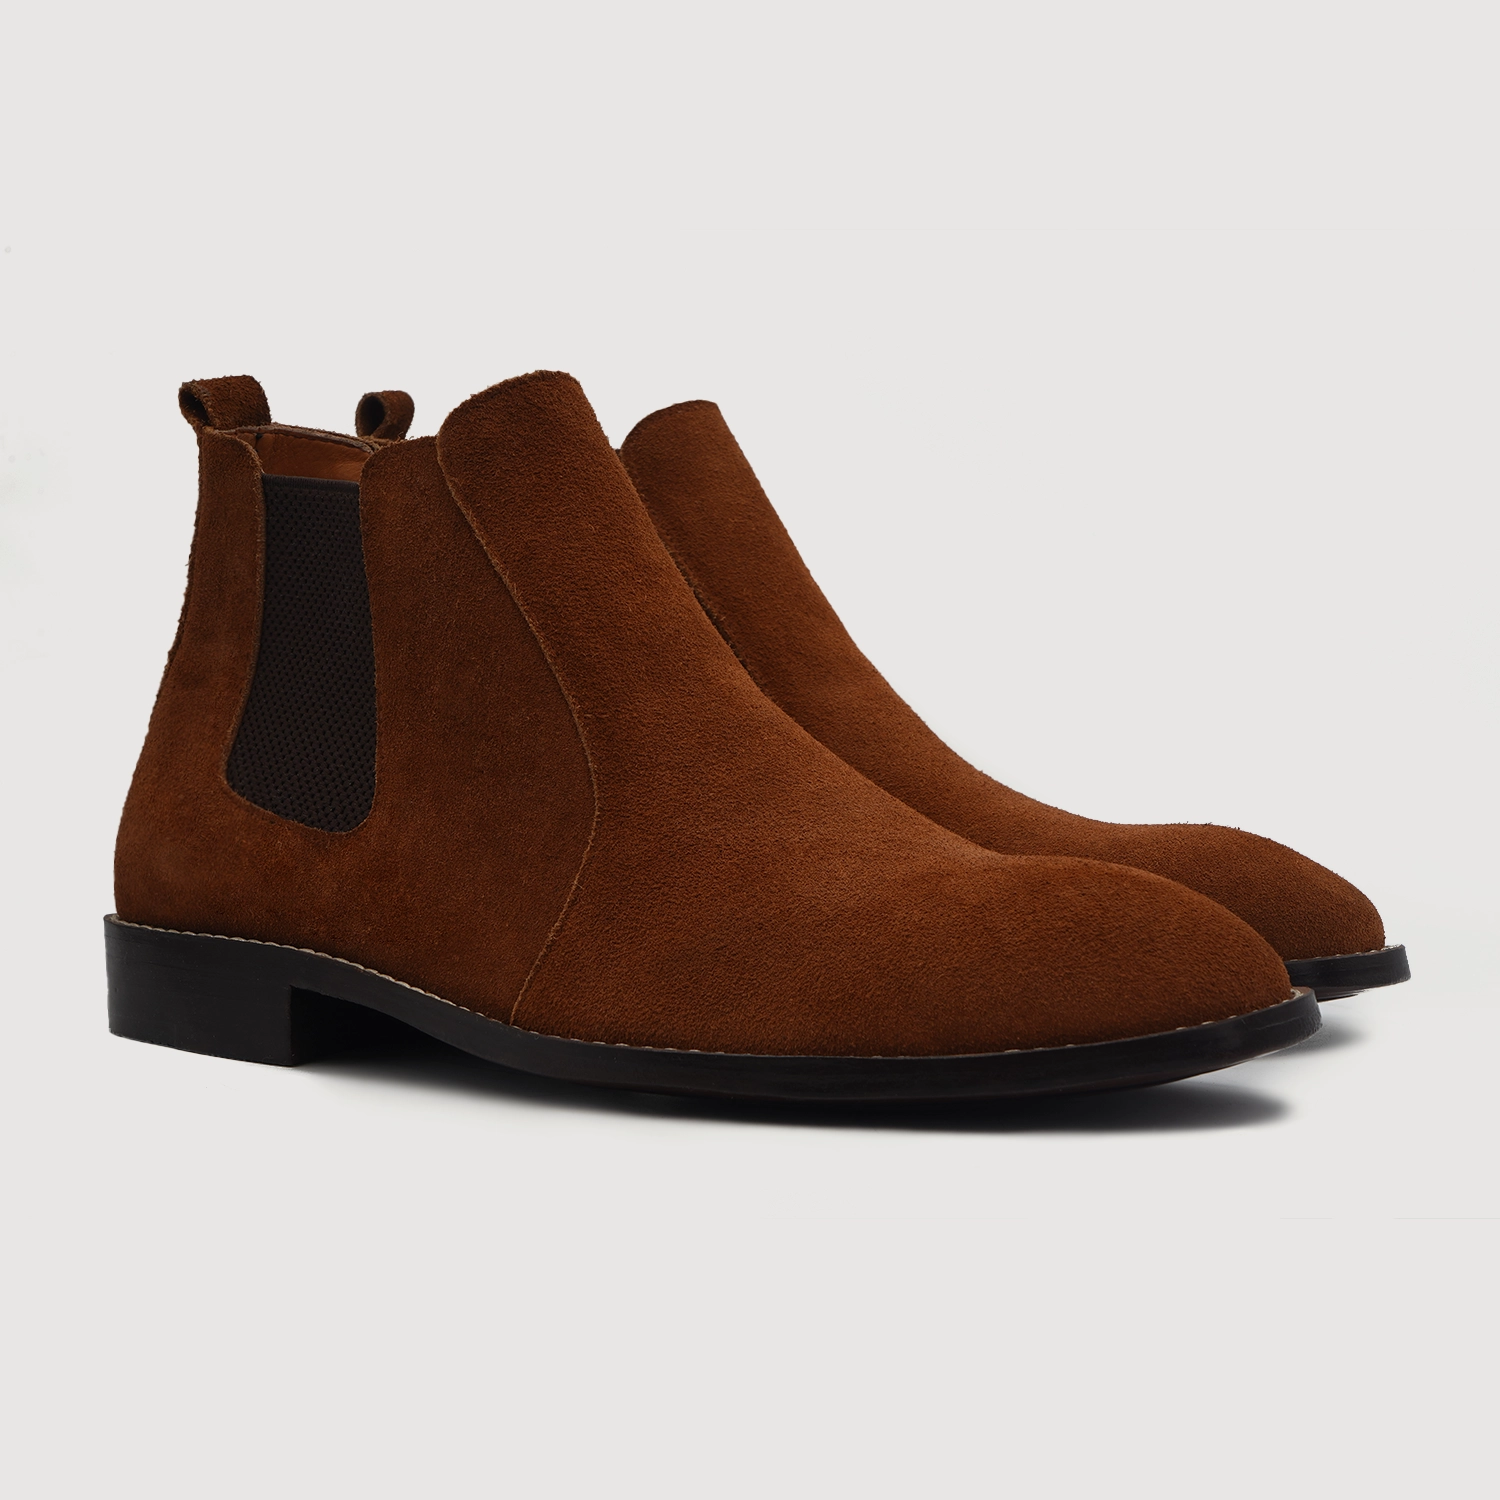 Men’s leather boots - Casual Edition